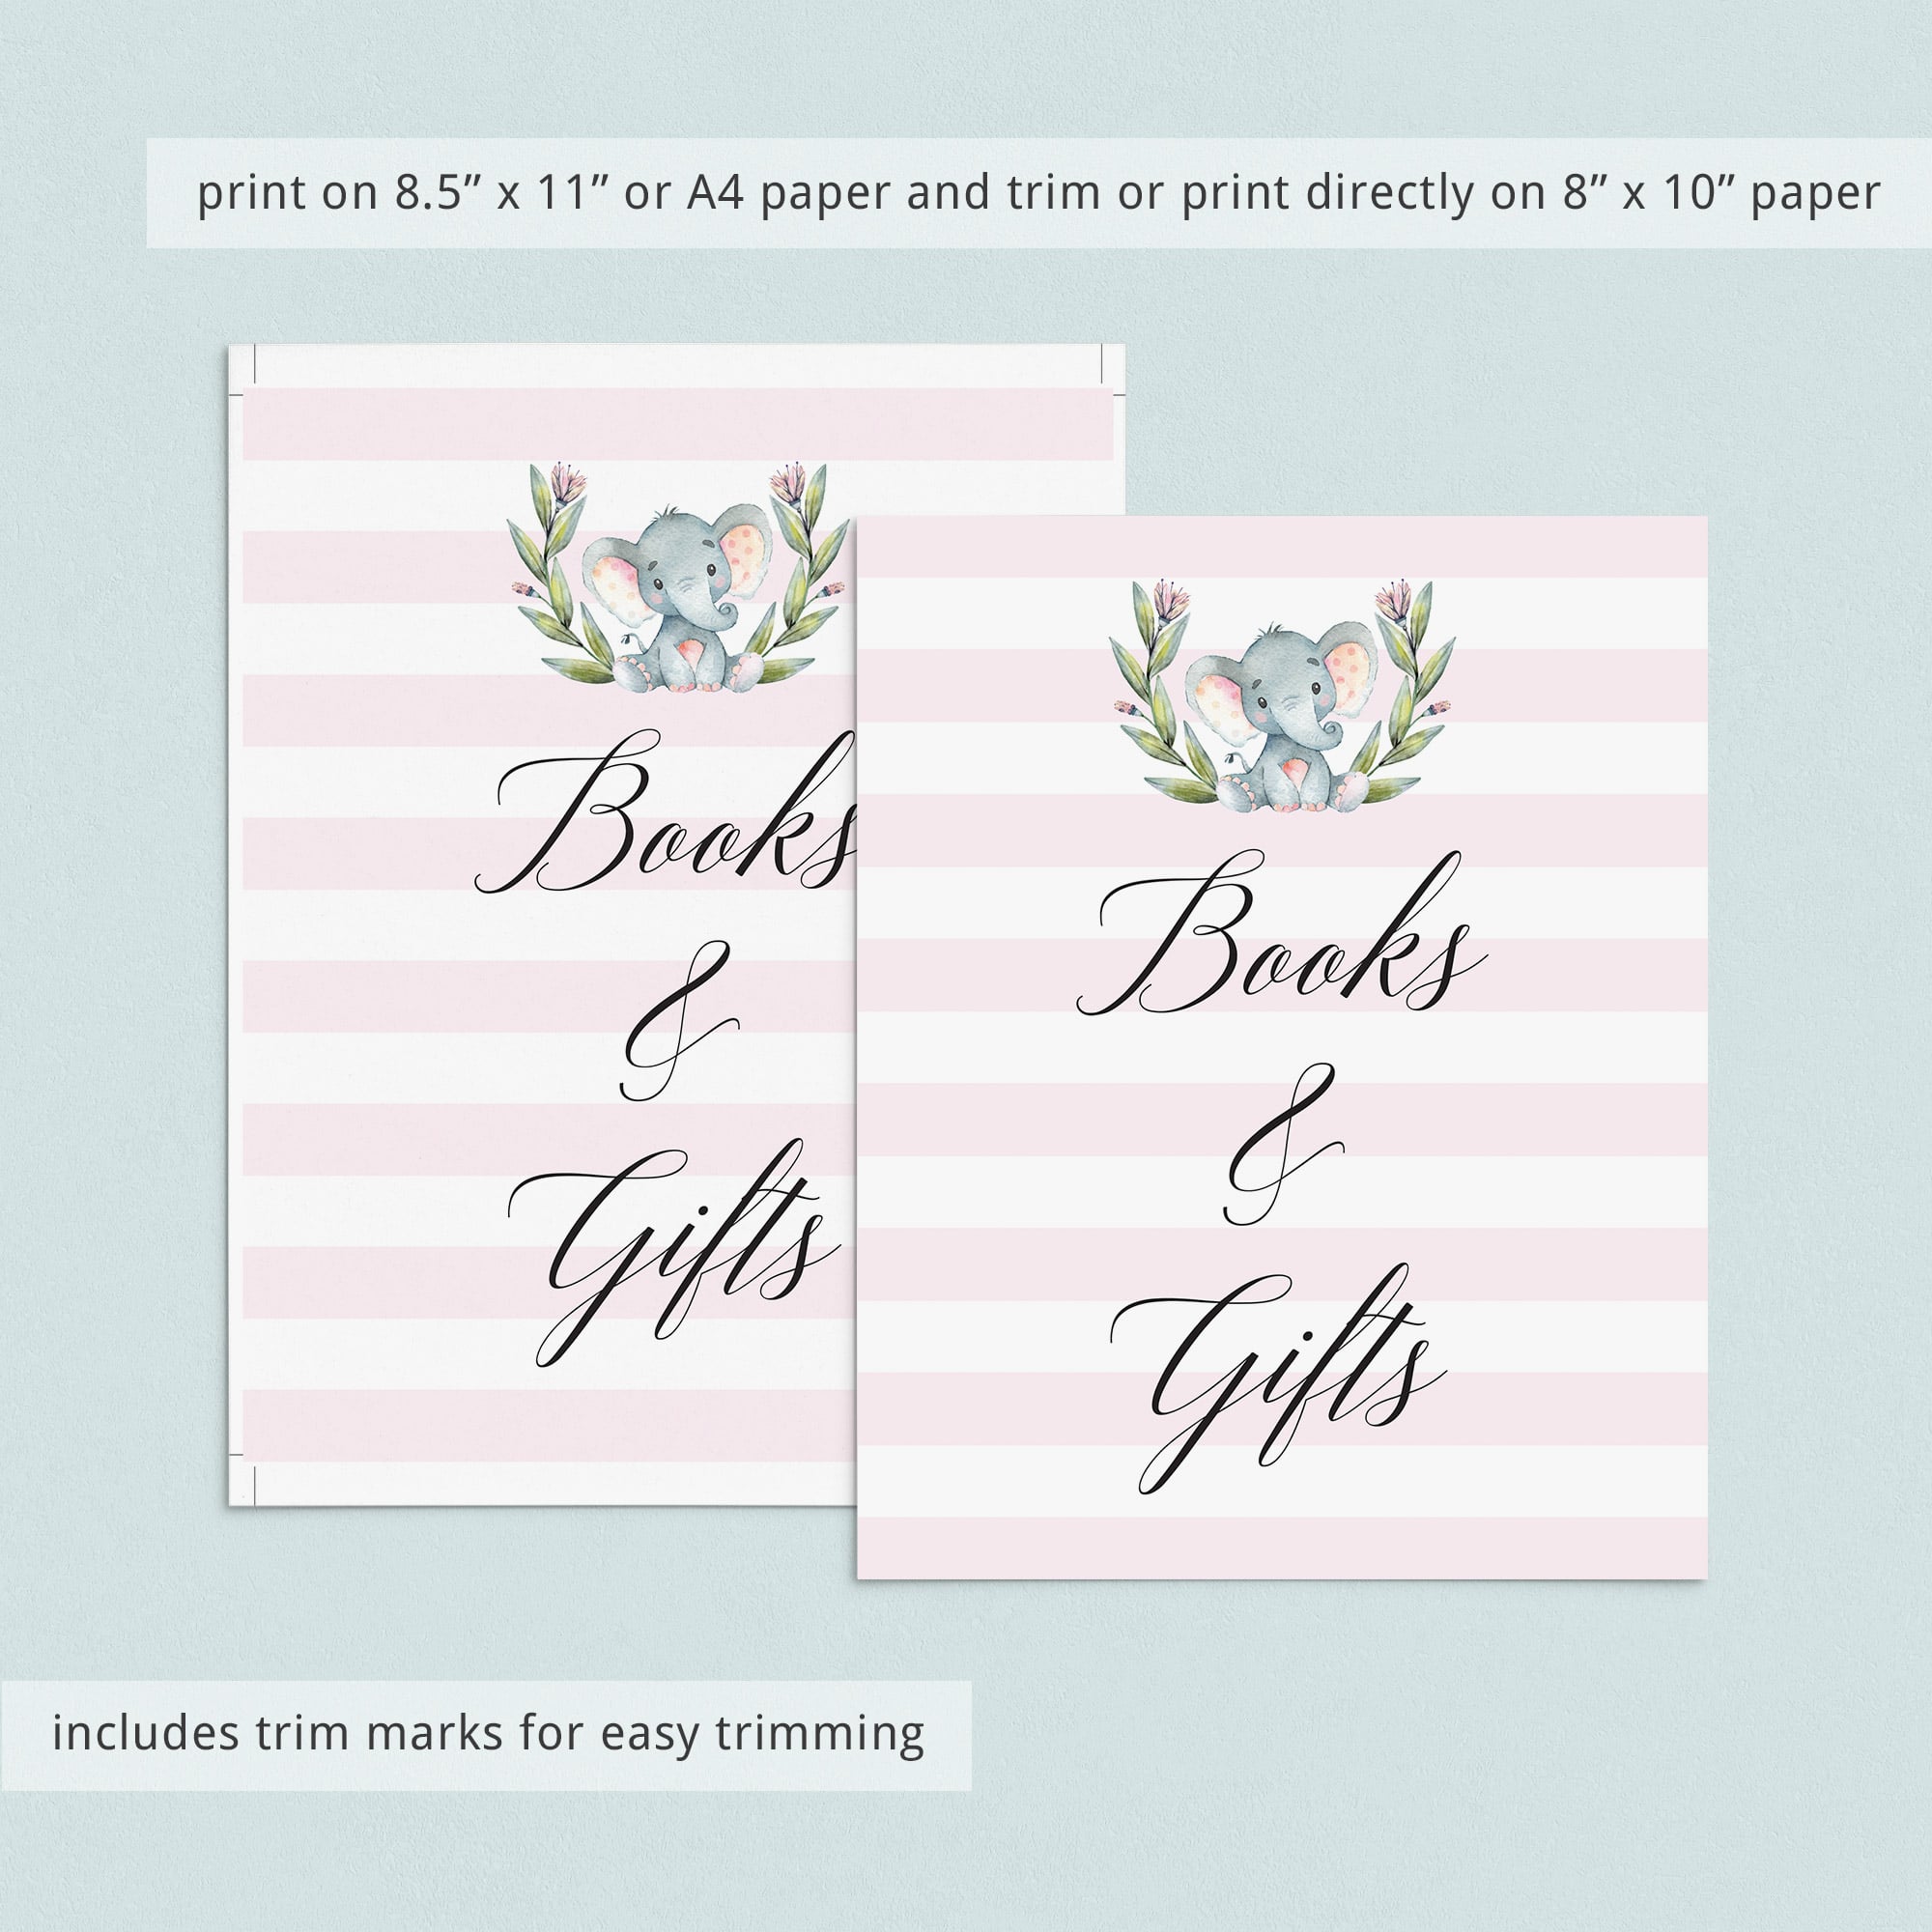 Books and gifts table signage pink and white theme by LittleSizzle